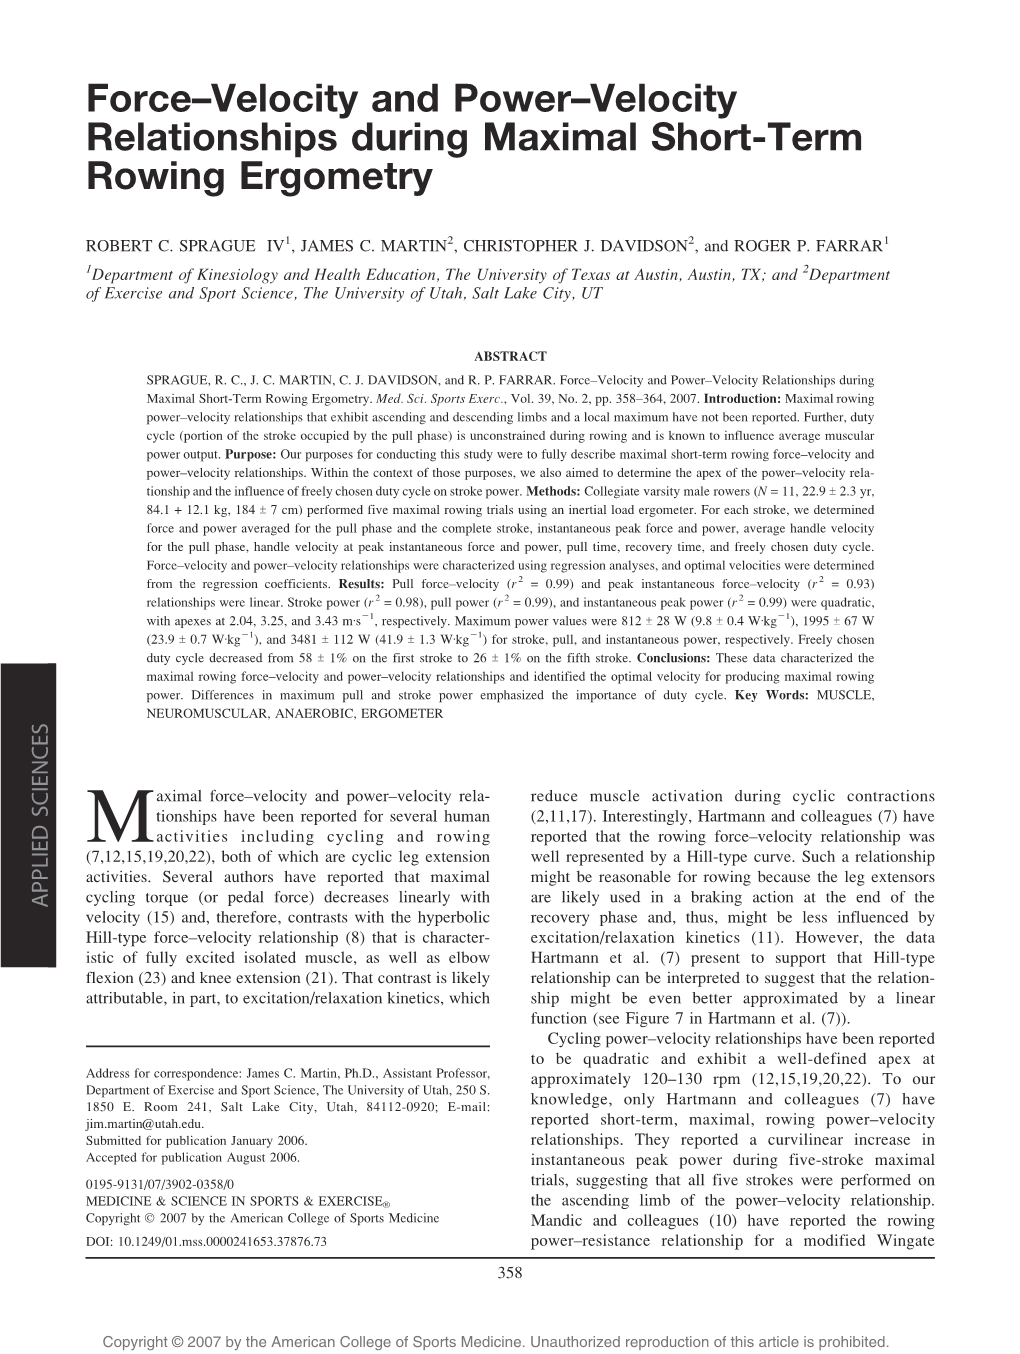 Force–Velocity and Power–Velocity Relationships During Maximal Short-Term Rowing Ergometry